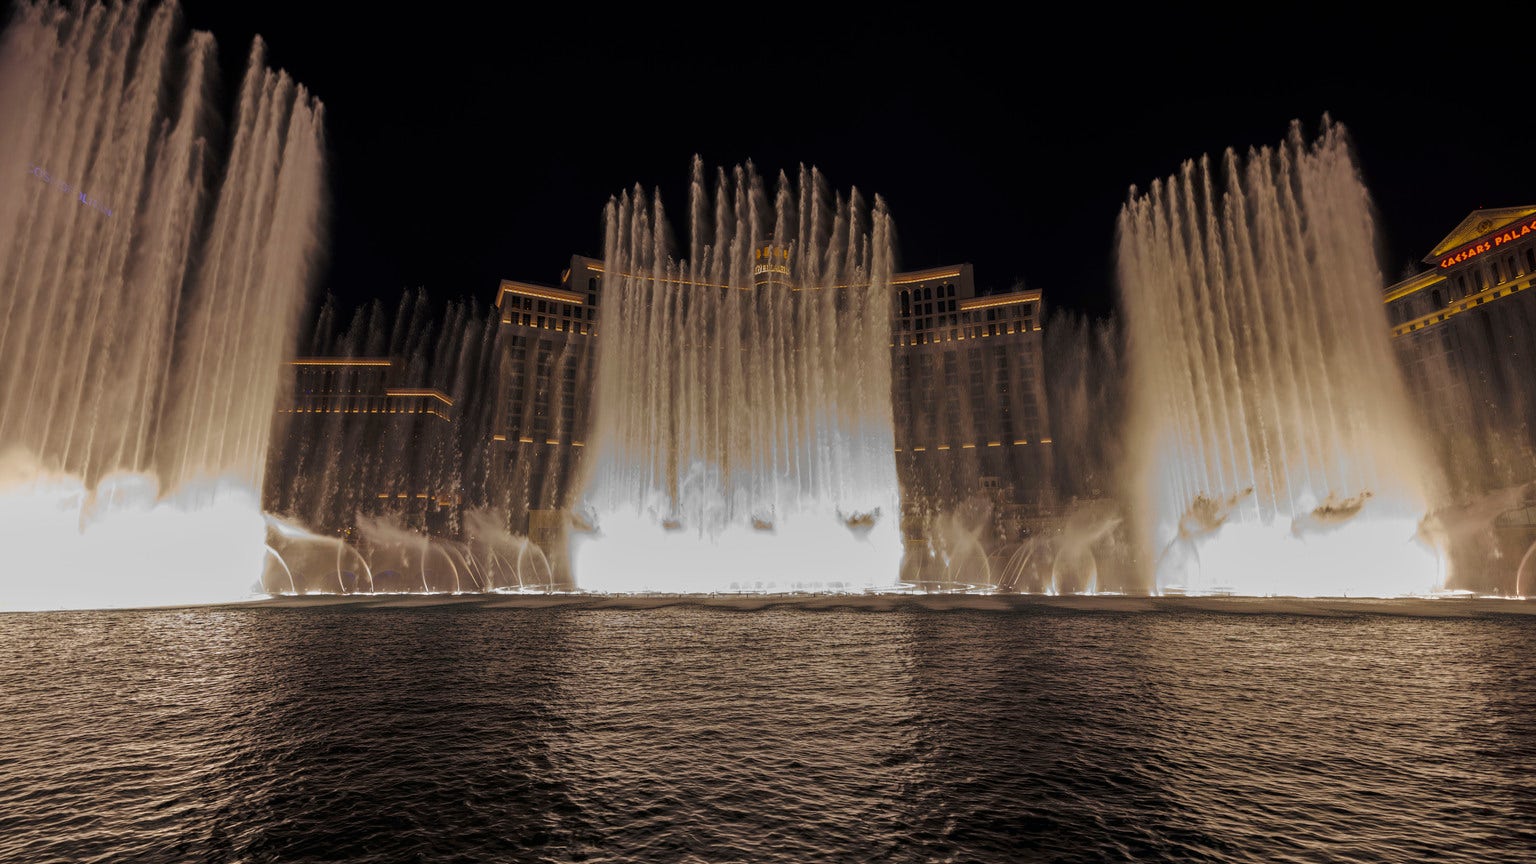 Bellagio Las Vegas on X: The final touches have been added